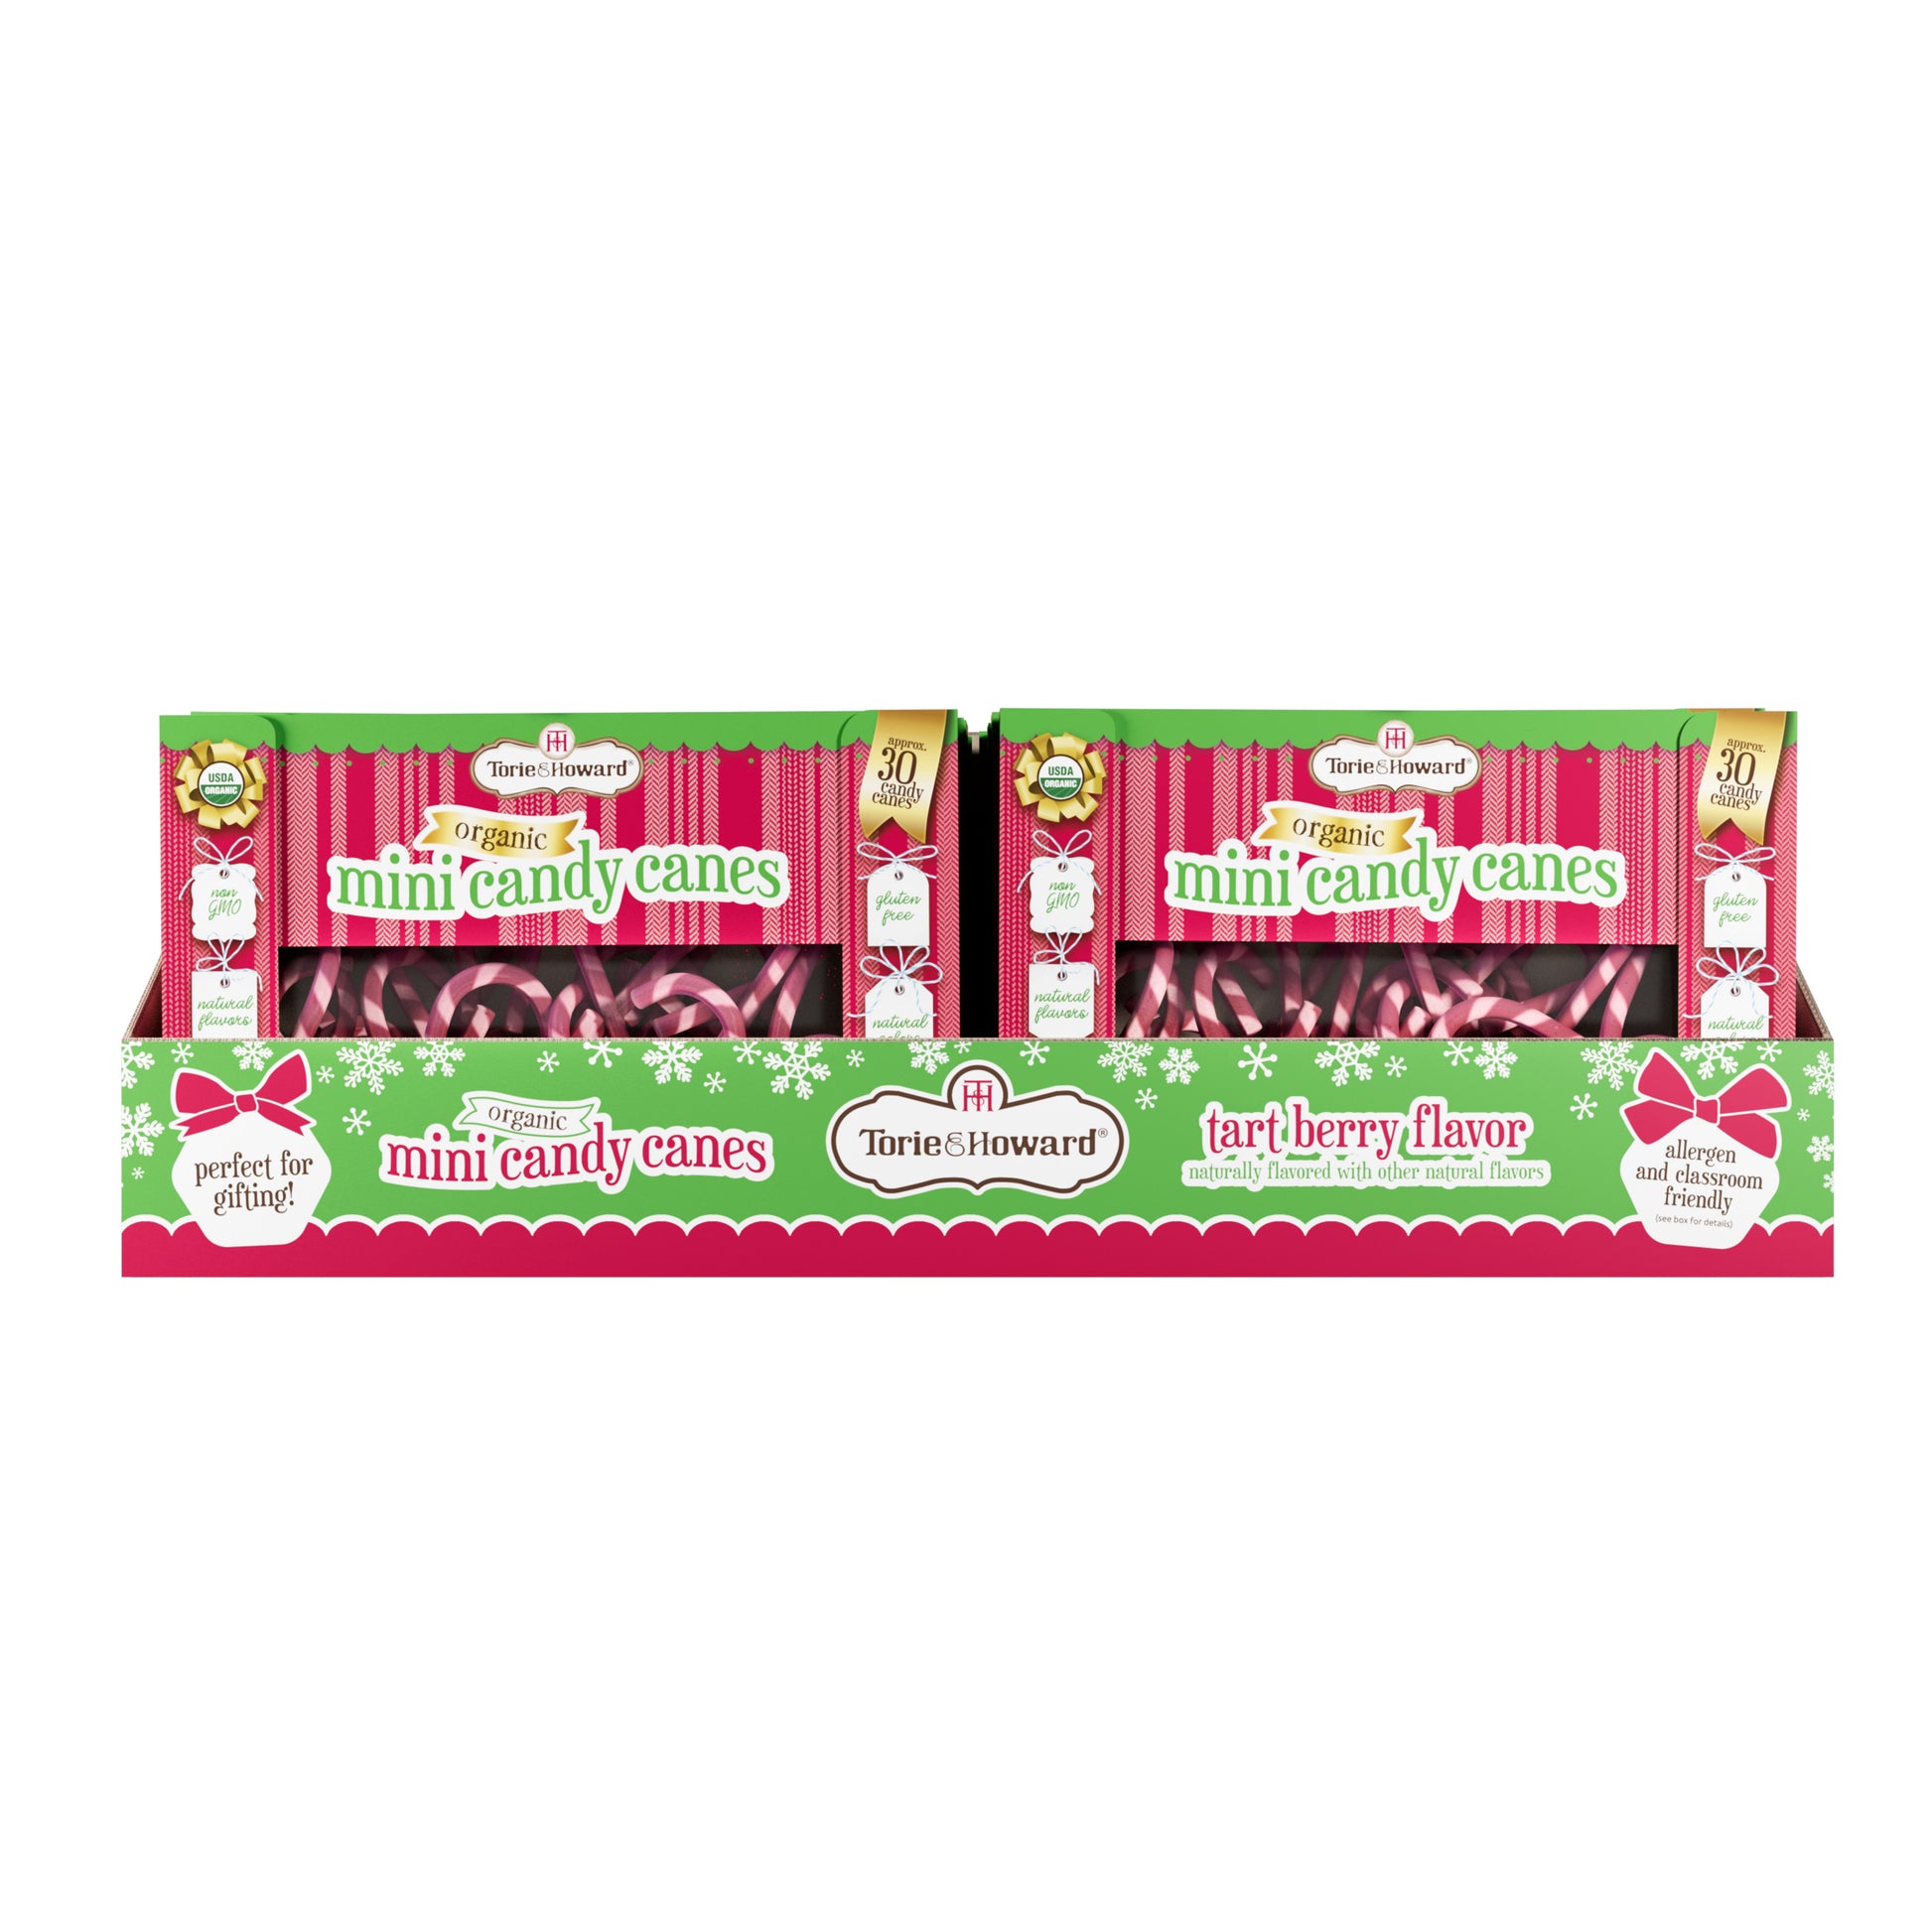 12 count box of Torie & Howard Organic Mini Candy Canes boxes